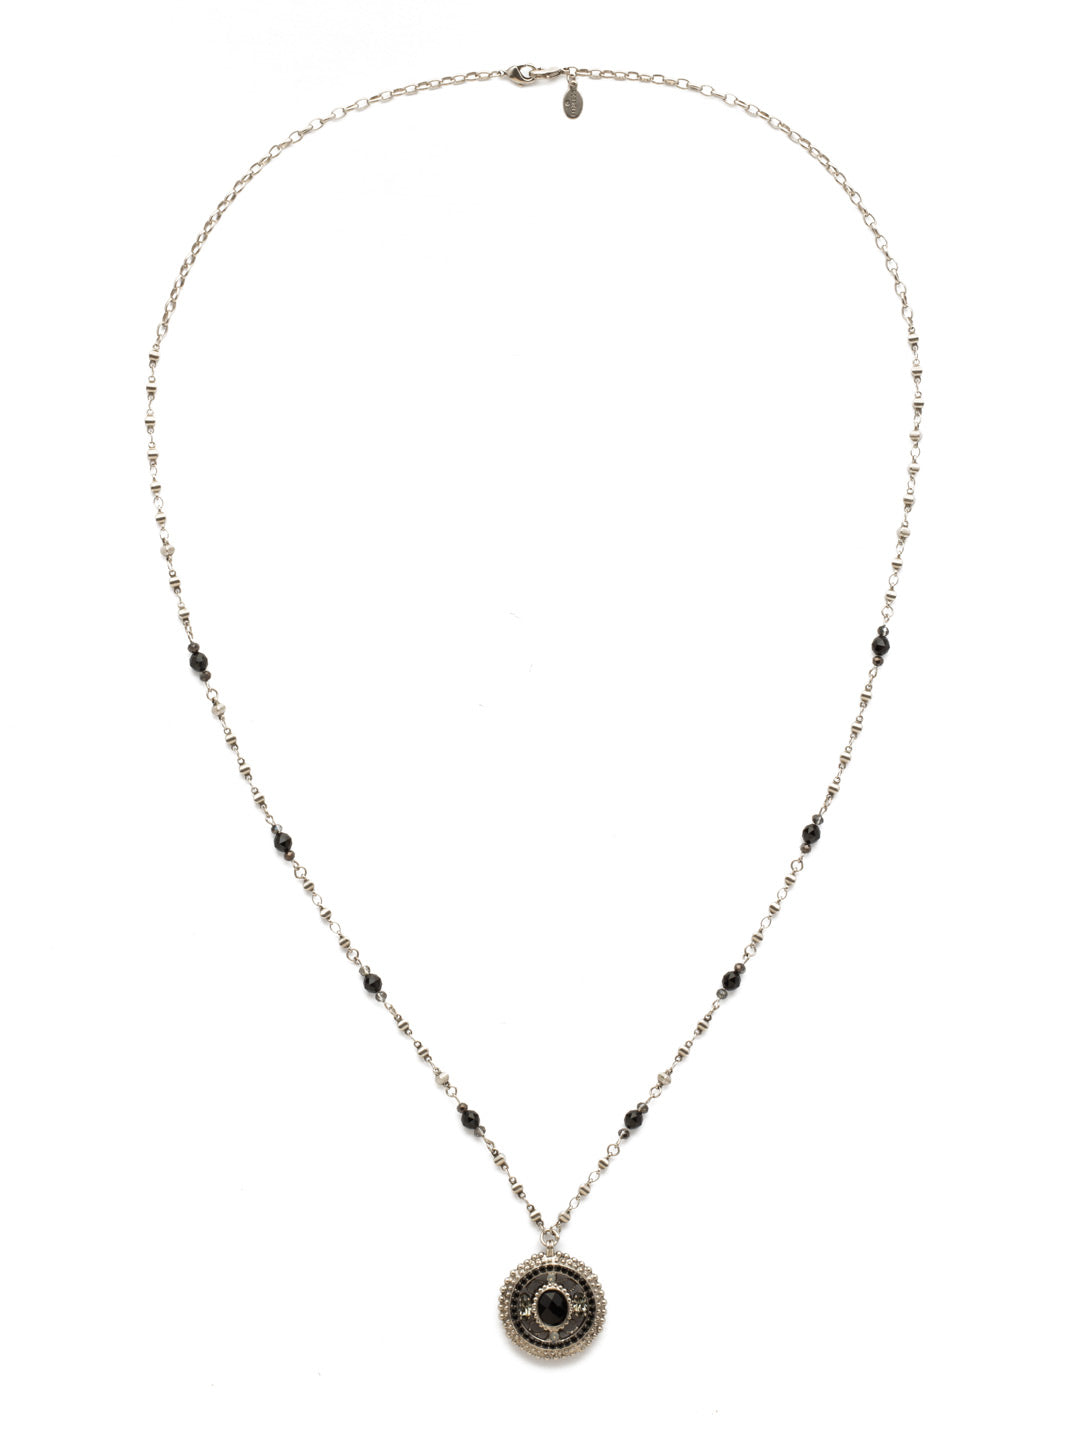 Majestic Medallion Pendant - NDK3ASBON - <p>An ornate gem-laden medallion is highlighted by a delicate textured chain in this must-have design. This style also features a double lobster claw closure which allows for extreme length adjustment and easy layering with other necklaces. From Sorrelli's Black Onyx collection in our Antique Silver-tone finish.</p>